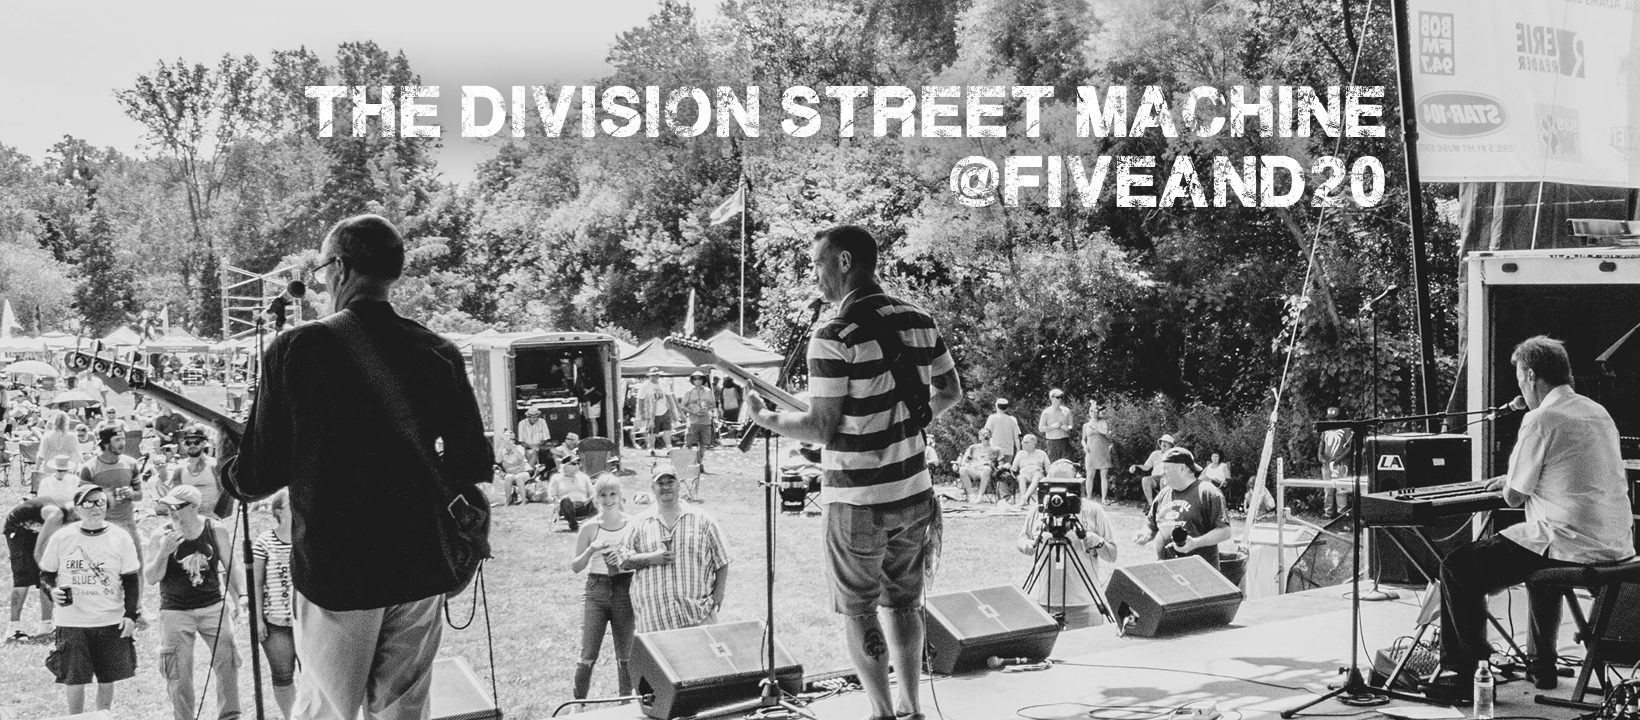 The Division Street Machine Sunday Sesh at Five & 20